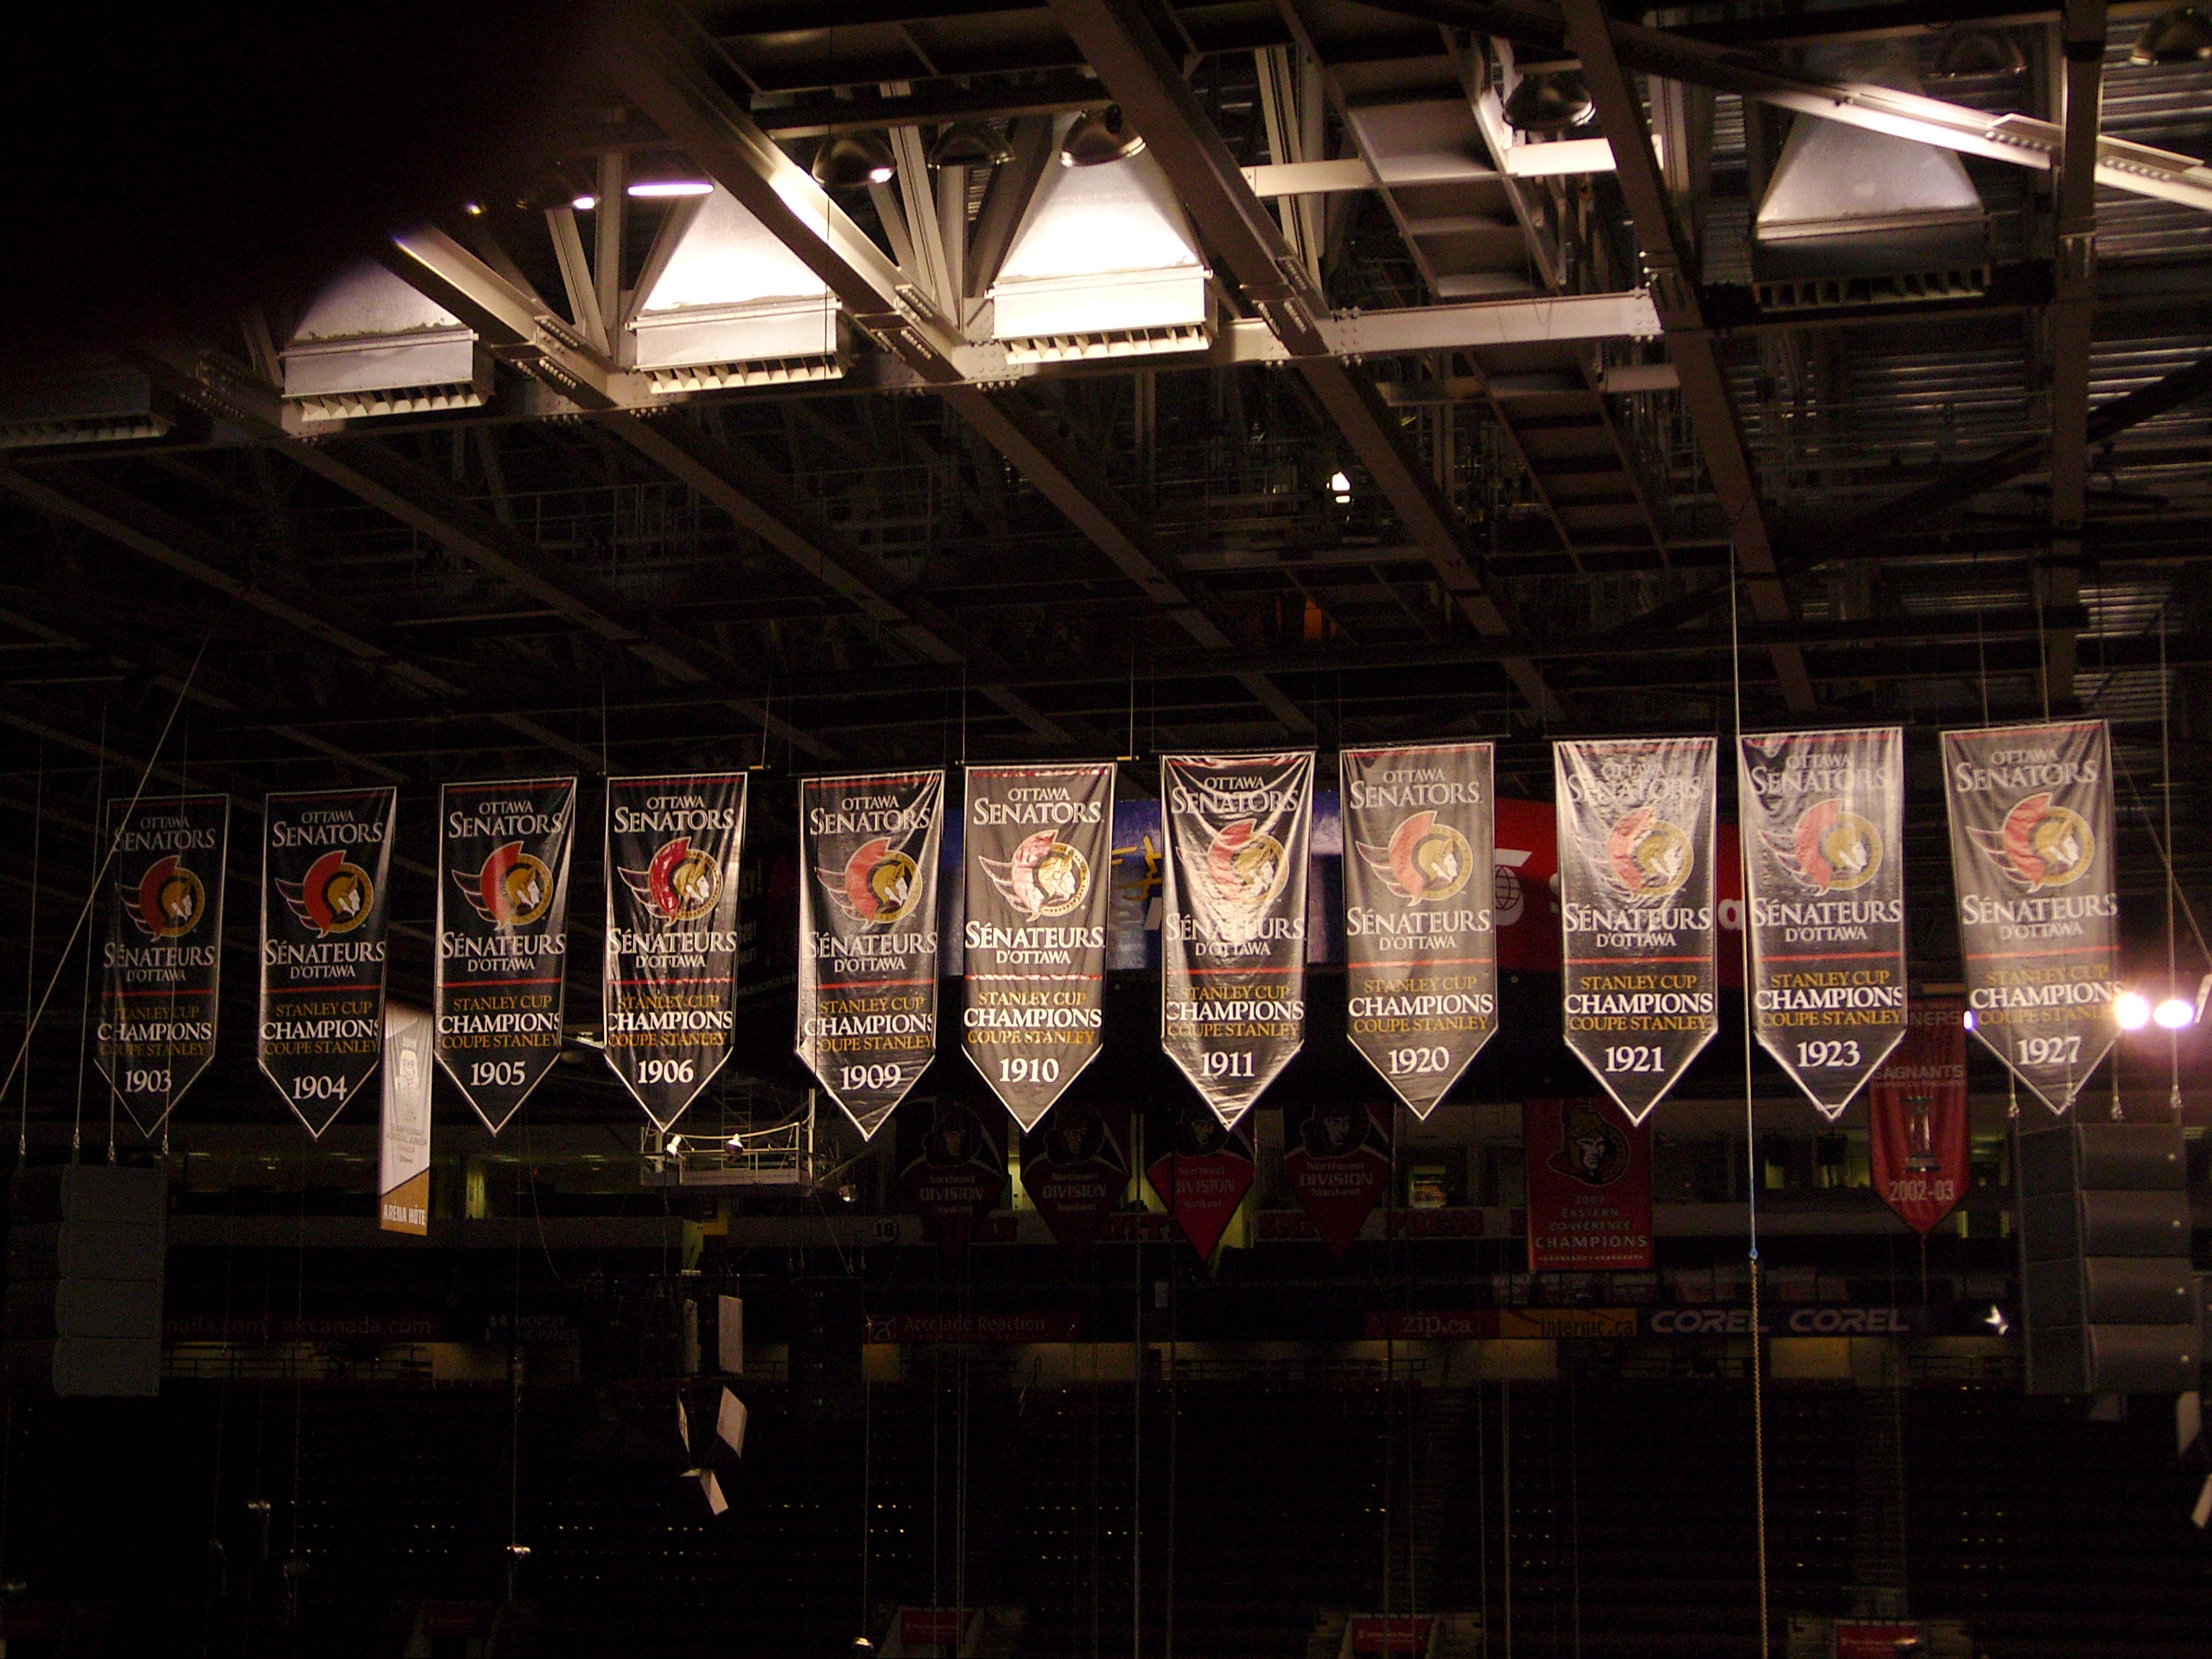 File:Stanley cup banner 2.jpg - Wikimedia Commons